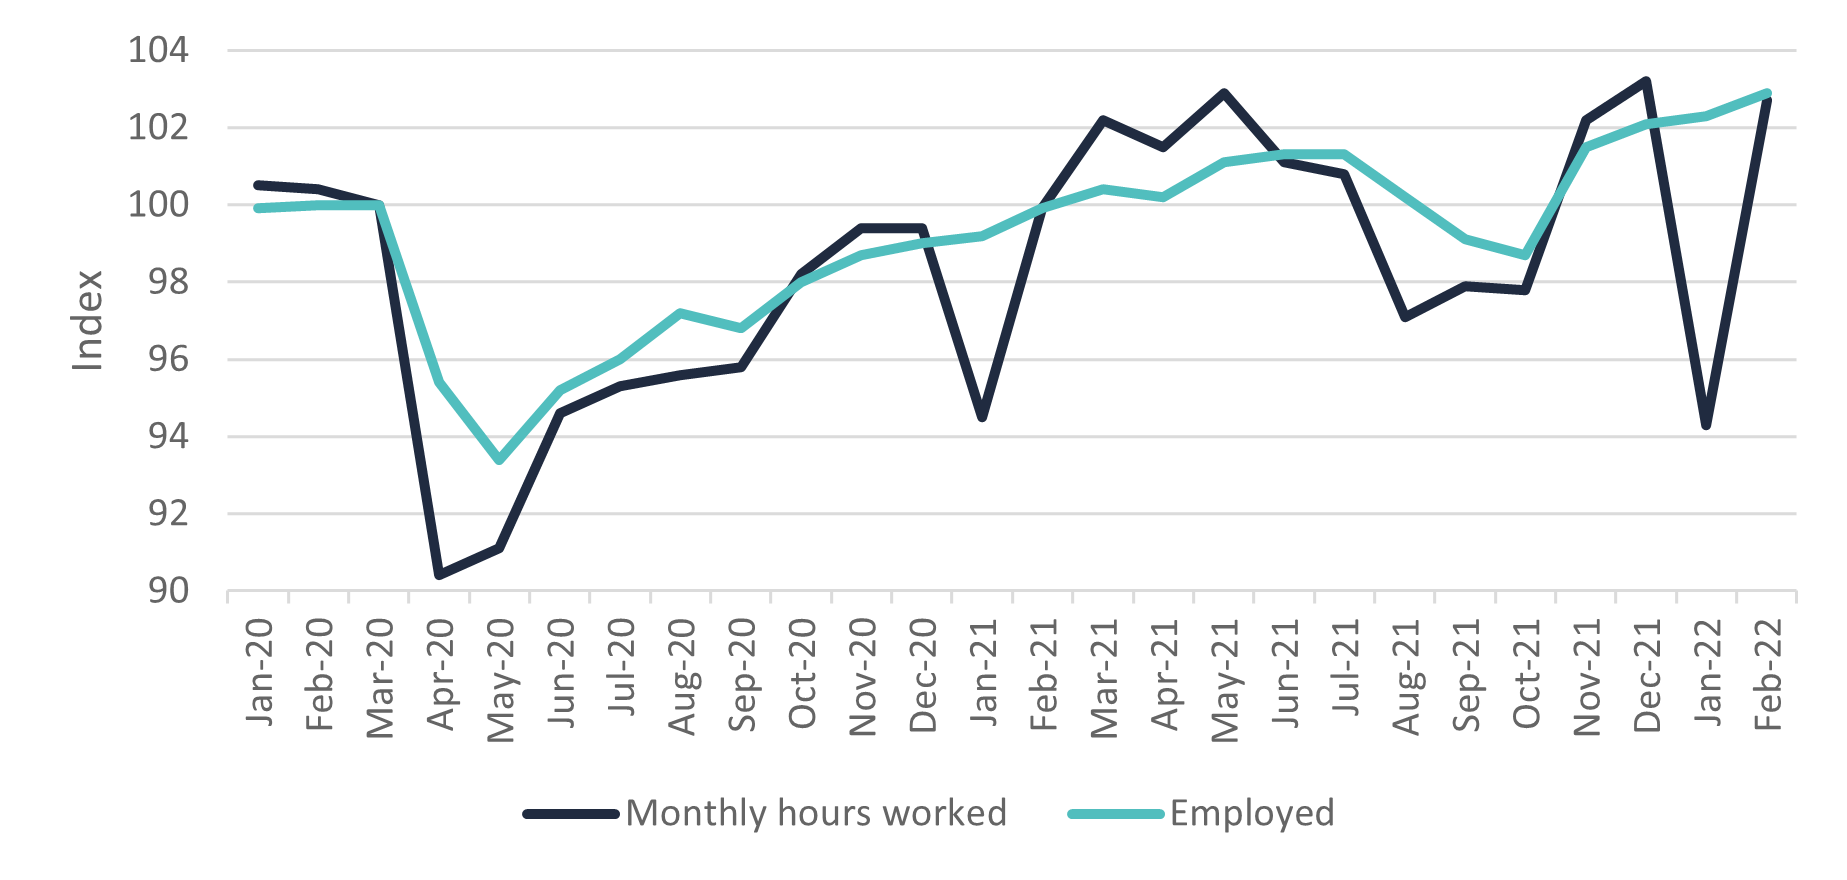 Seasonally adjusted employment and monthly hours worked Feb 22